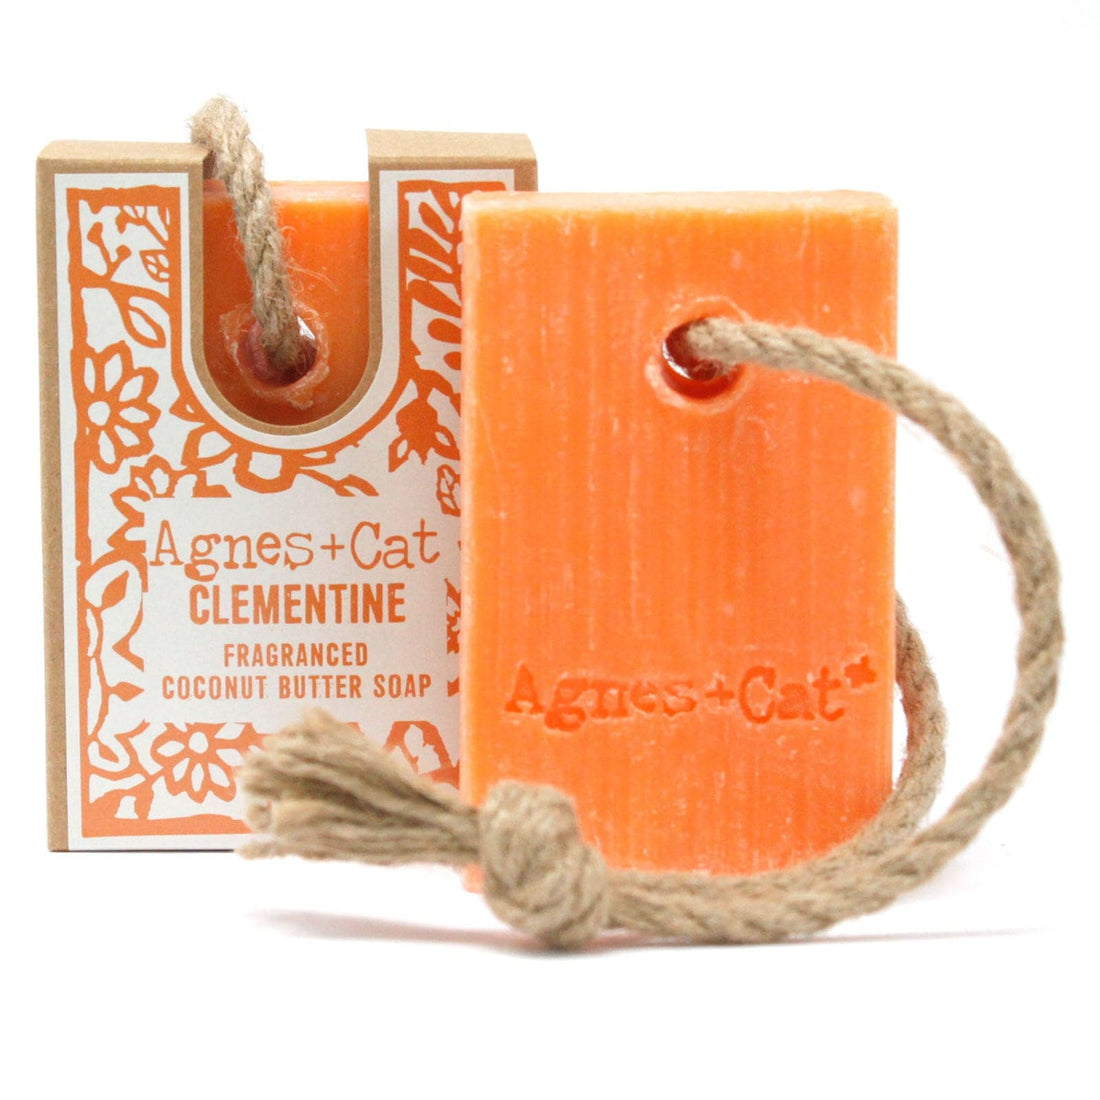 Soap On A Rope - Clementine - best price from Maltashopper.com ACSR-03DS